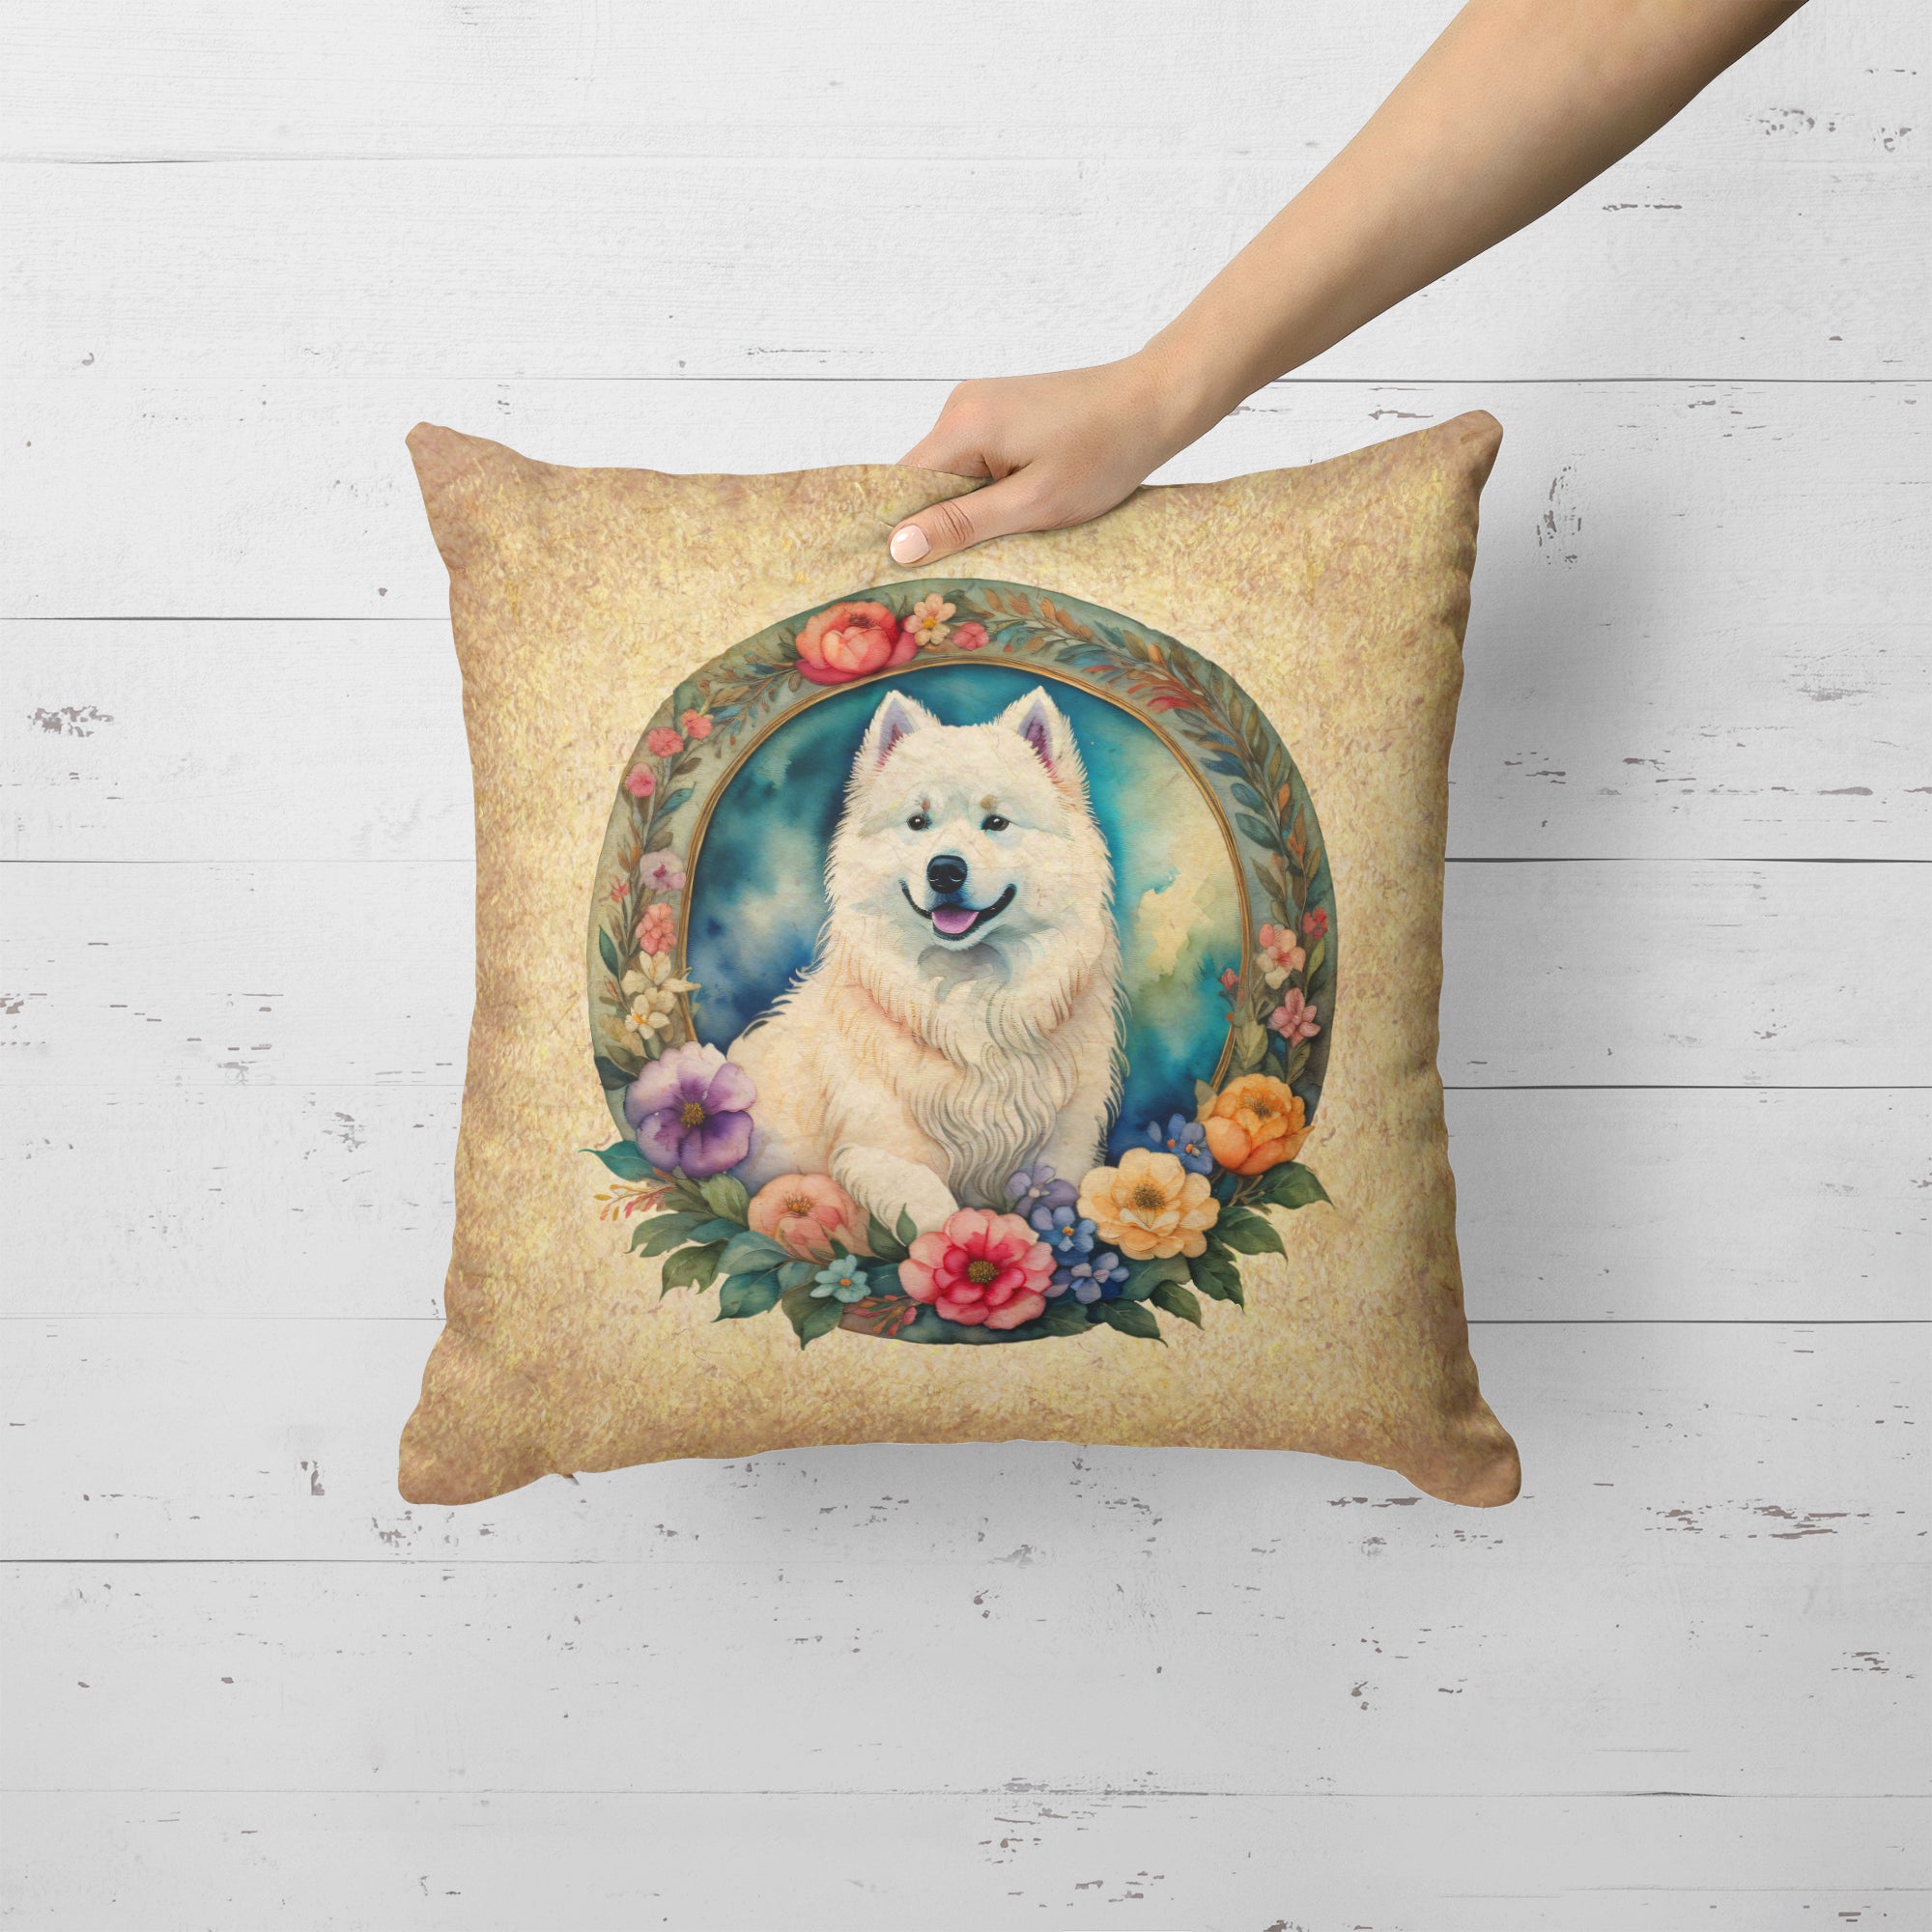 Buy this Samoyed and Flowers Fabric Decorative Pillow